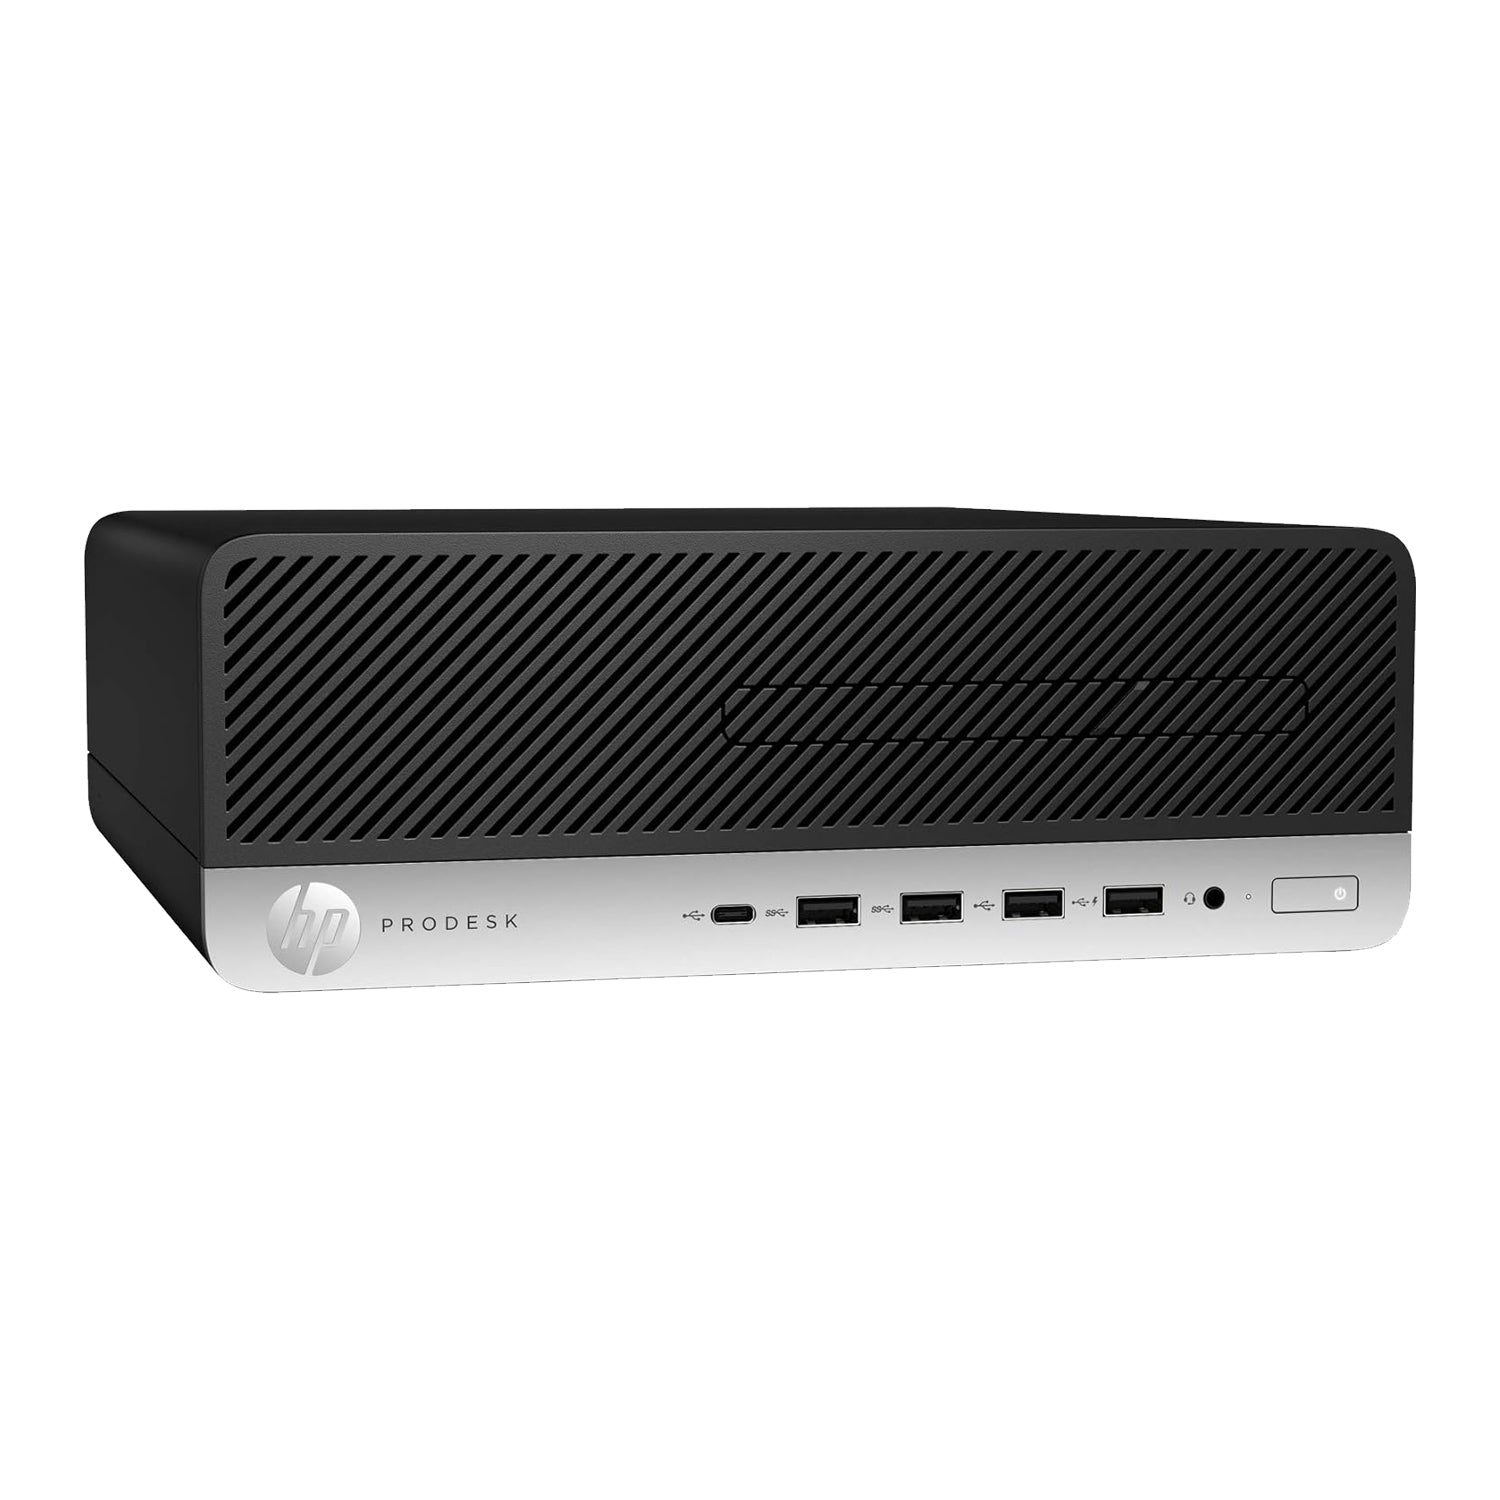 HP ProDesk 600 G5 SFF Business Desktop Computer PC(Intel Core i5 - 9th Gen up to 4.40 GHz Processor| 16GB - 32GB DDR4 RAM| 512GB - 2TB SSD| WINDOWS 11 PRO) Wireless Keyboard and Mouse - Refurbished